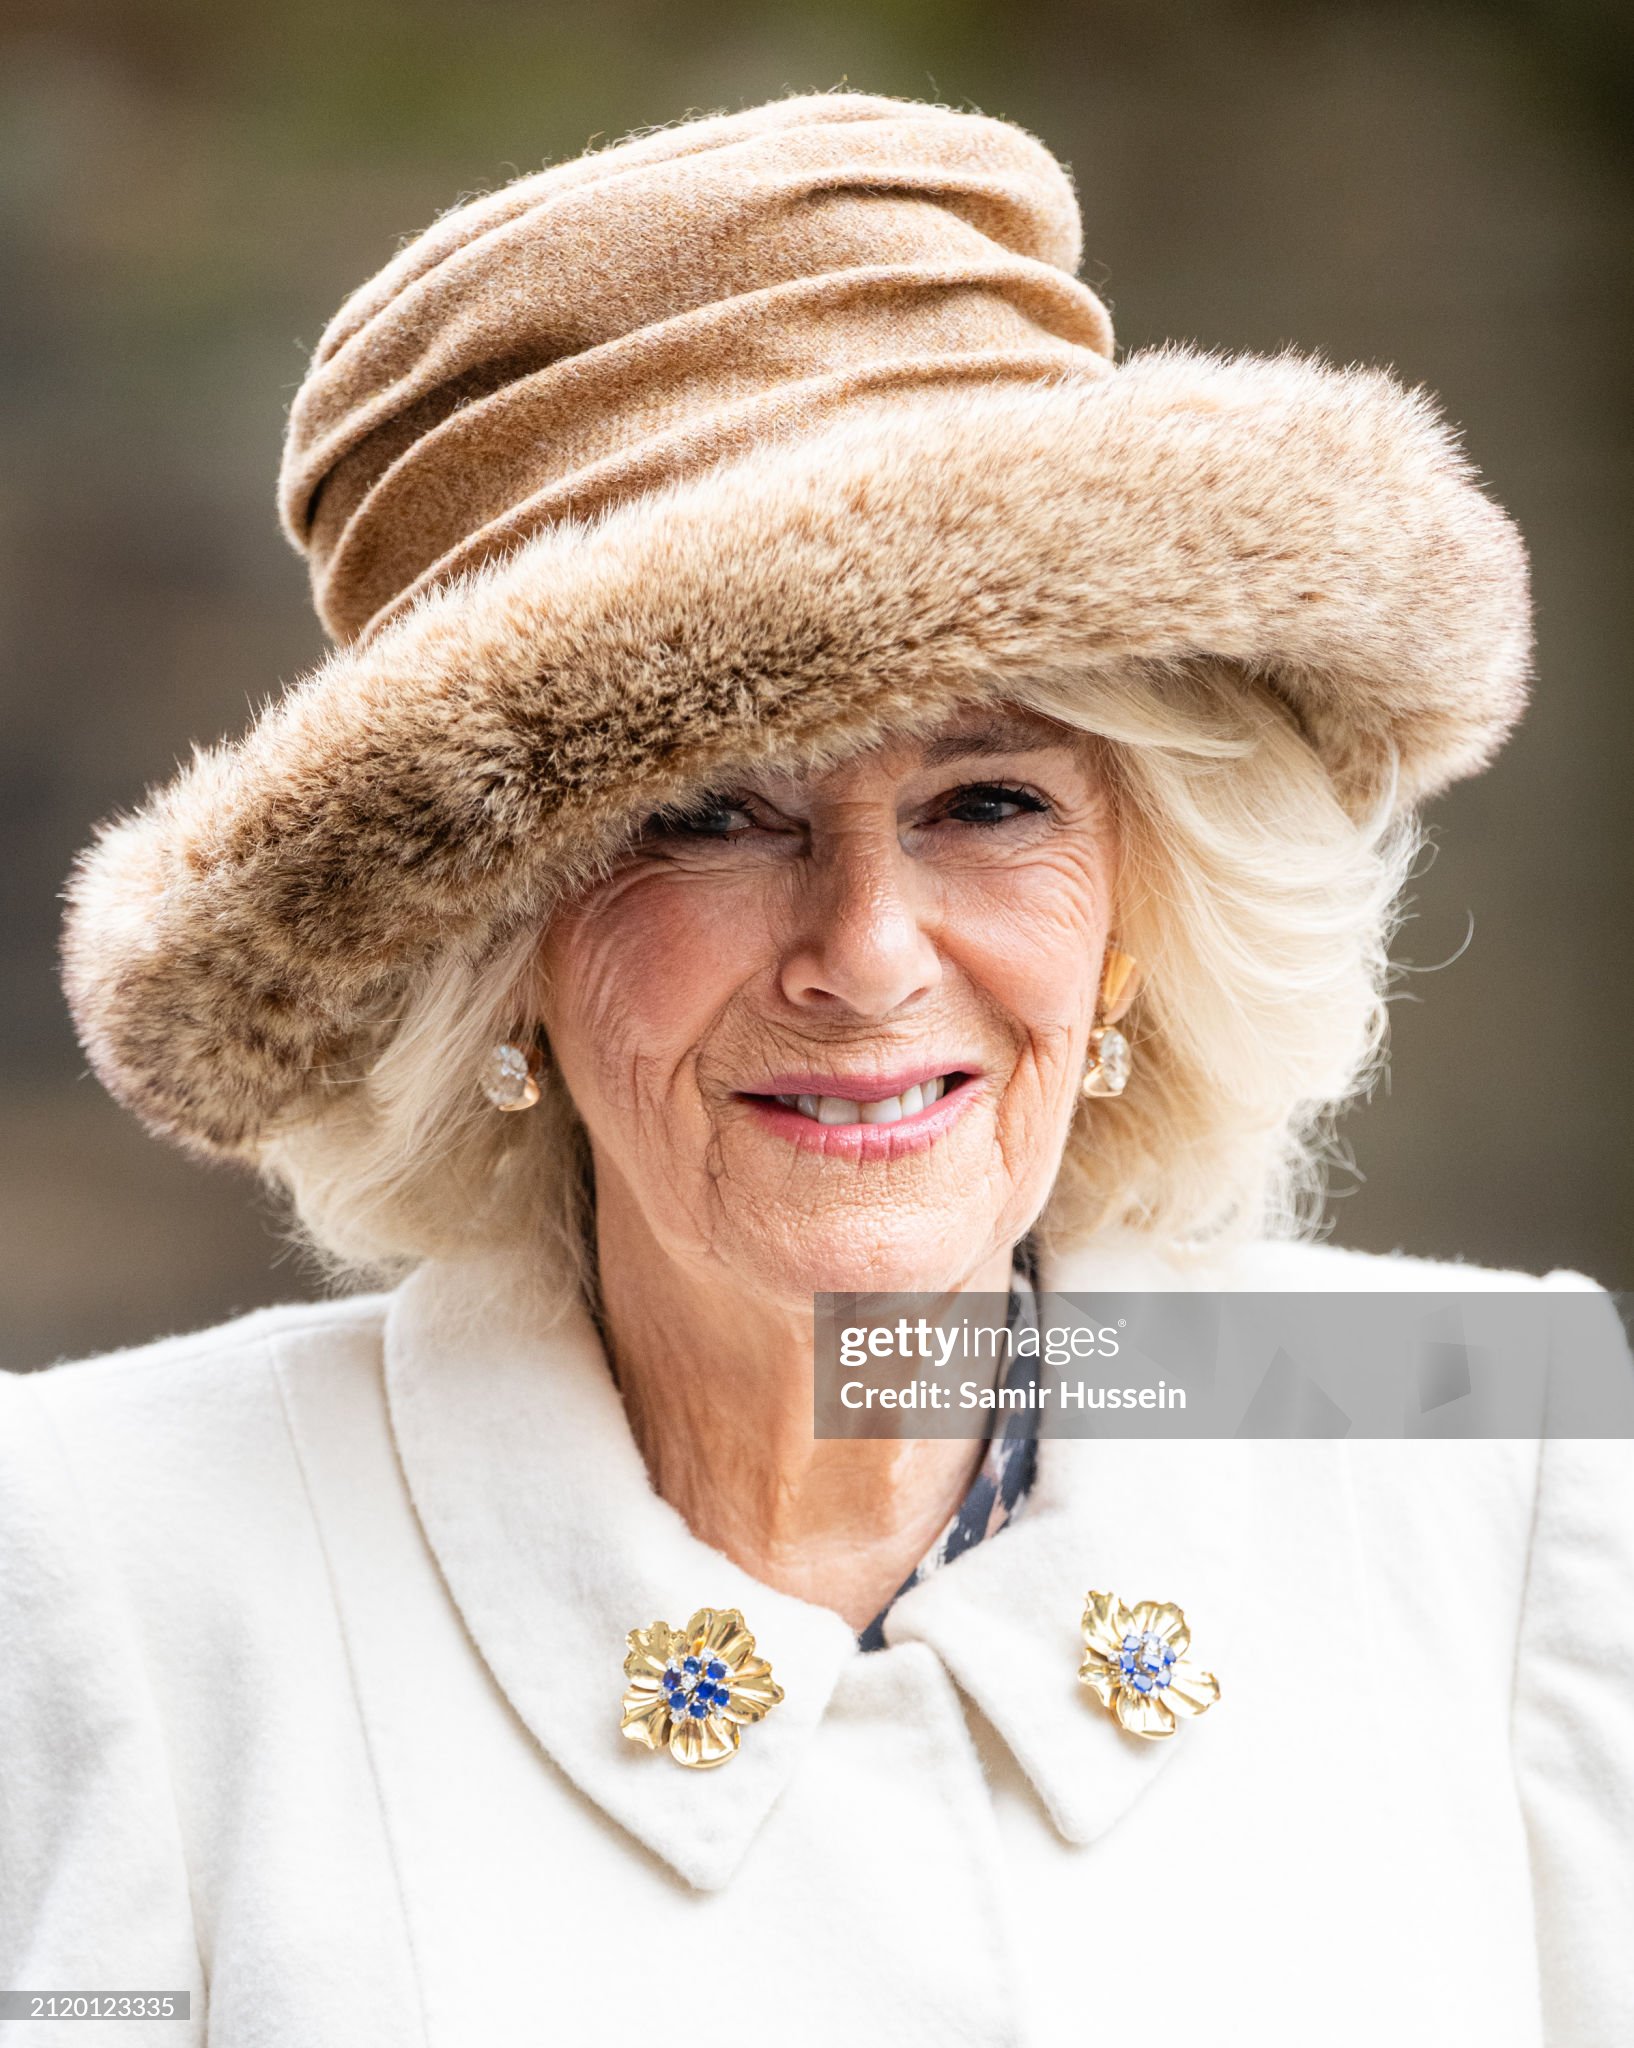 queen-camilla-attends-the-royal-maundy-service-at-worcester-cathedral.jpg?s=2048x2048&w=gi&k=20&c=yleZ2YiAWjnWsXmbQ7rheSeVf1MSbp6UJik-gXEJPi0=